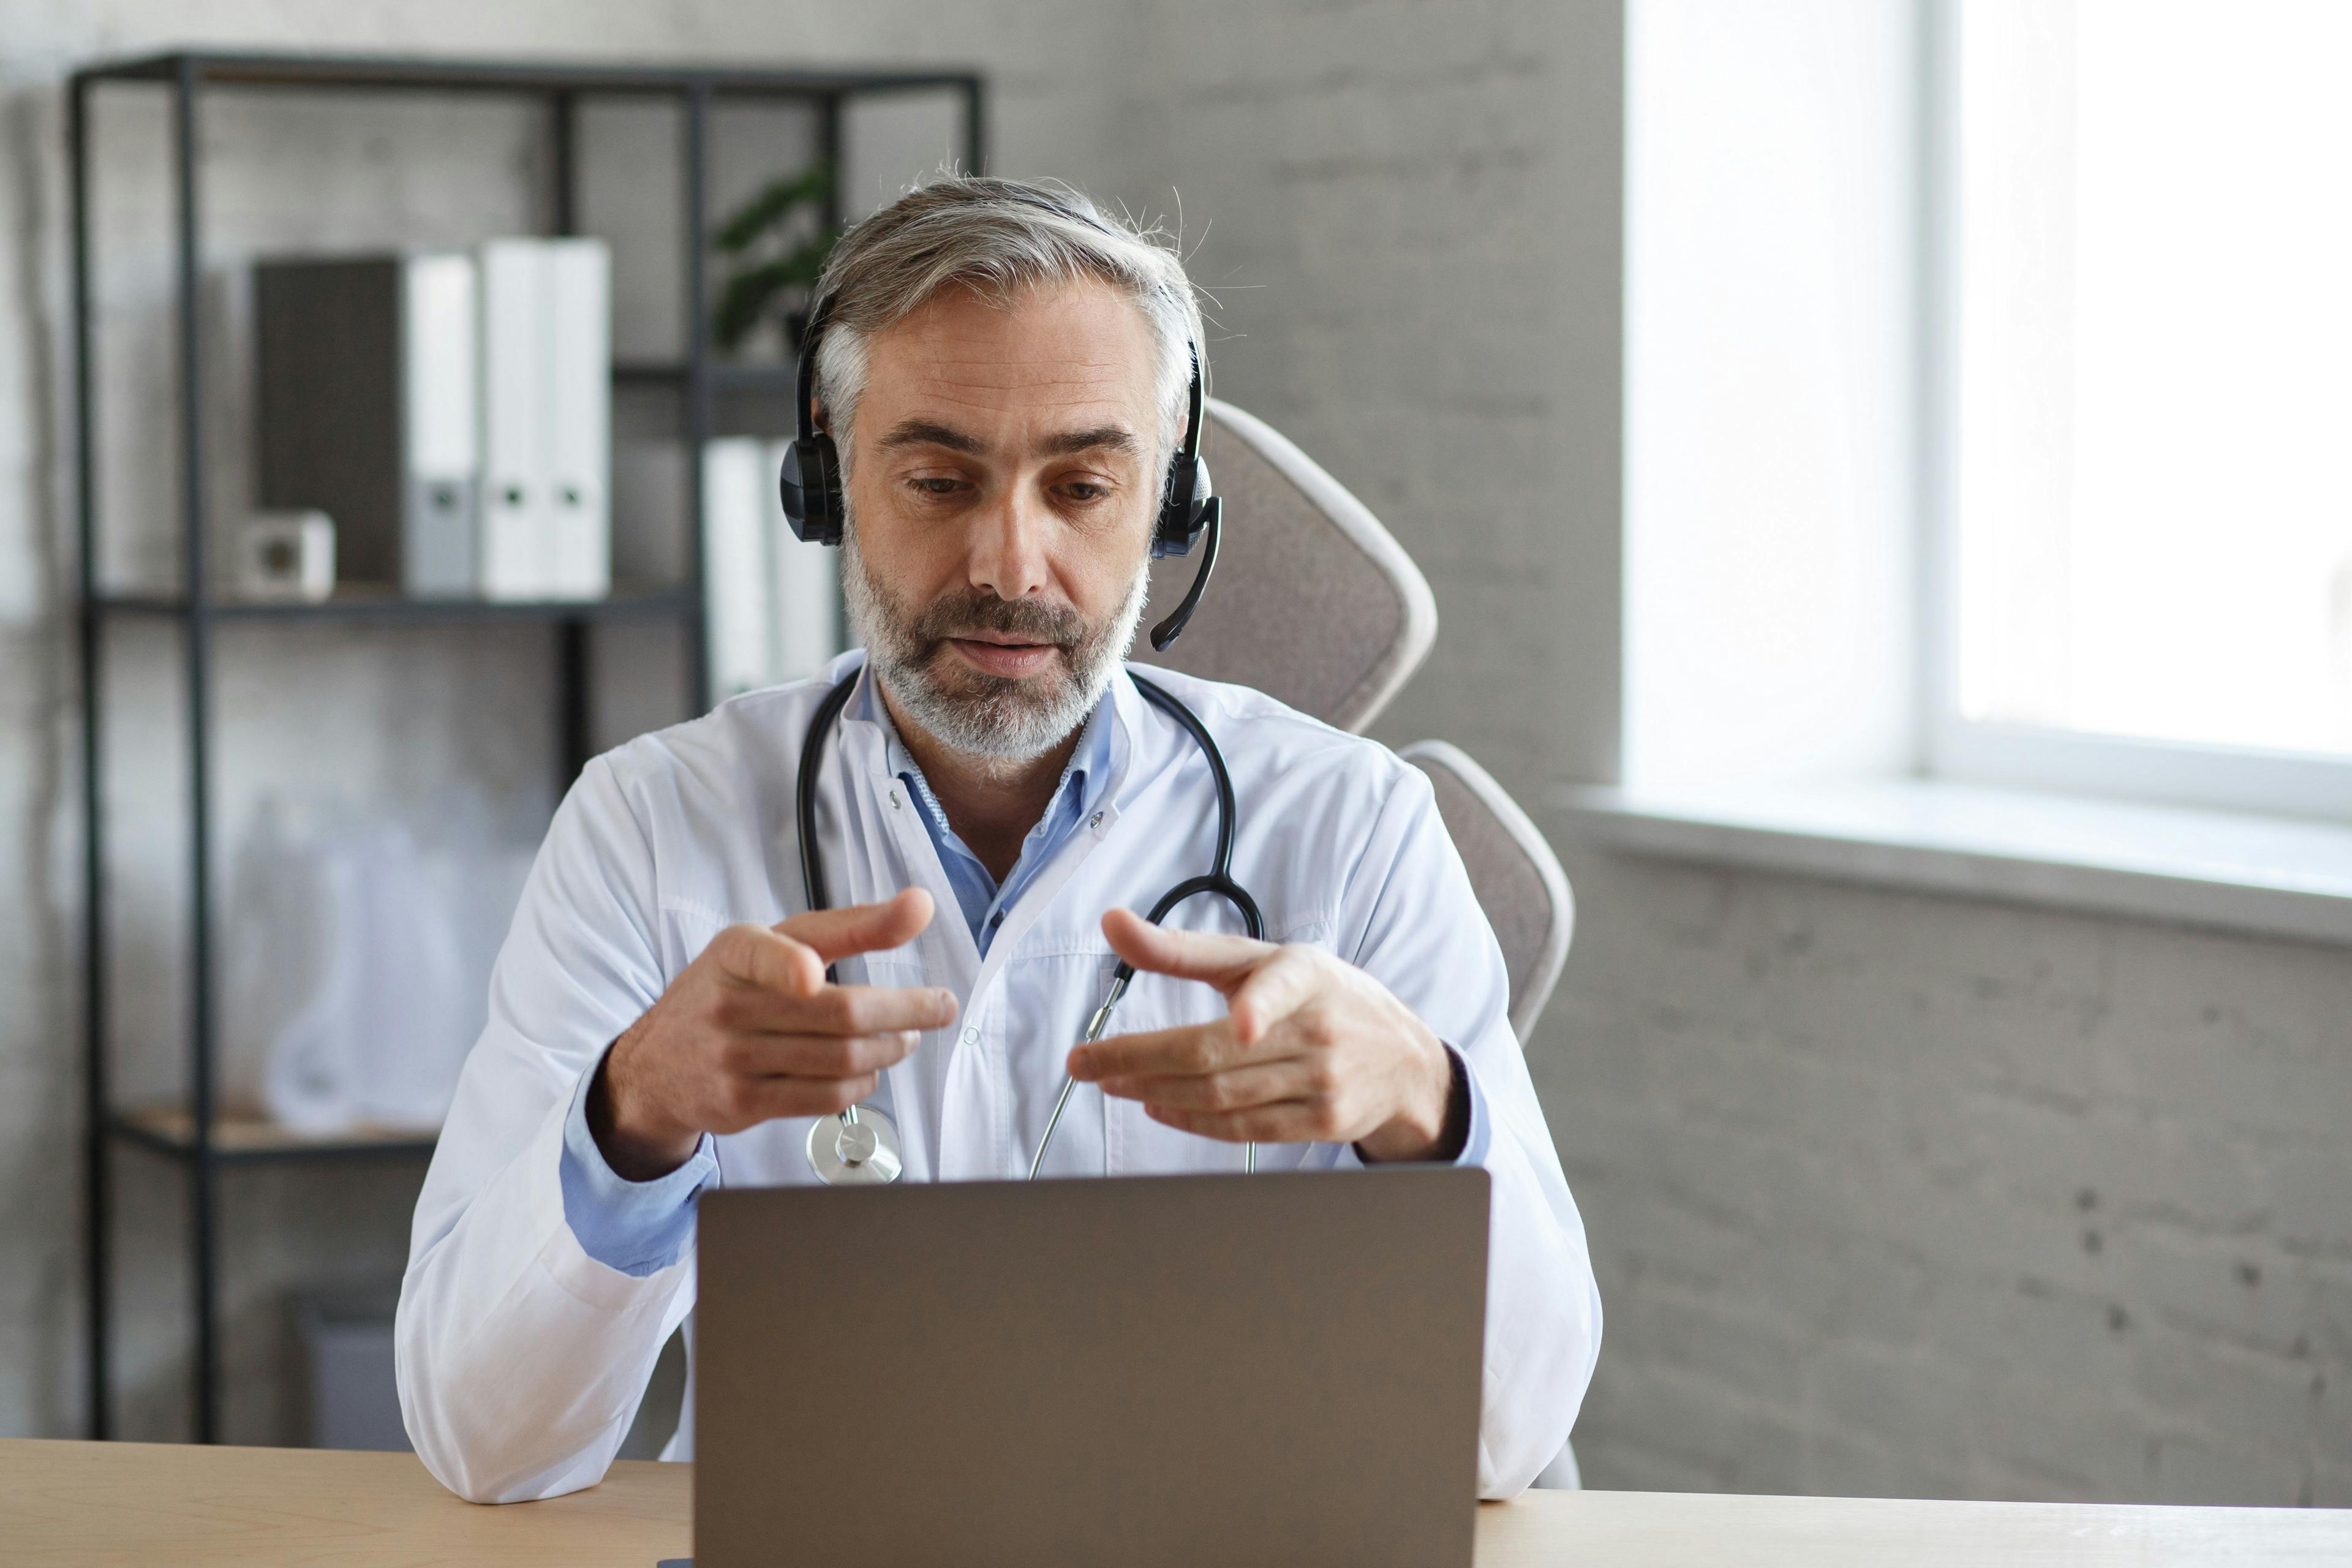 After a spike in the use of telehealth at nursing homes early in the pandemic, virtual visits dropped sharply. (Image credit: ©Yurii Maslak - stock.adobe.com)